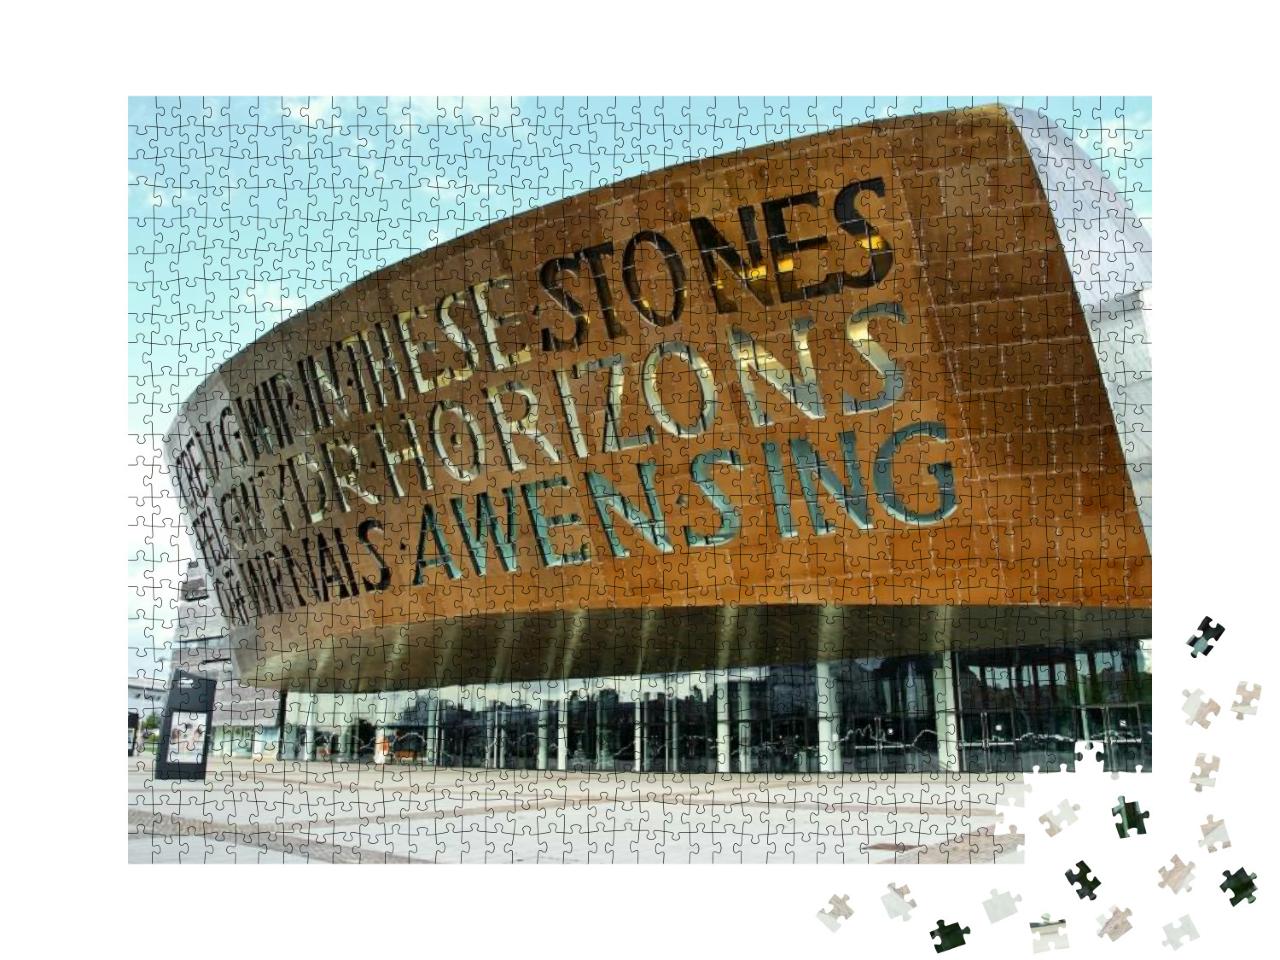 Wales Millennium Centre Cardiff Bay... Jigsaw Puzzle with 1000 pieces